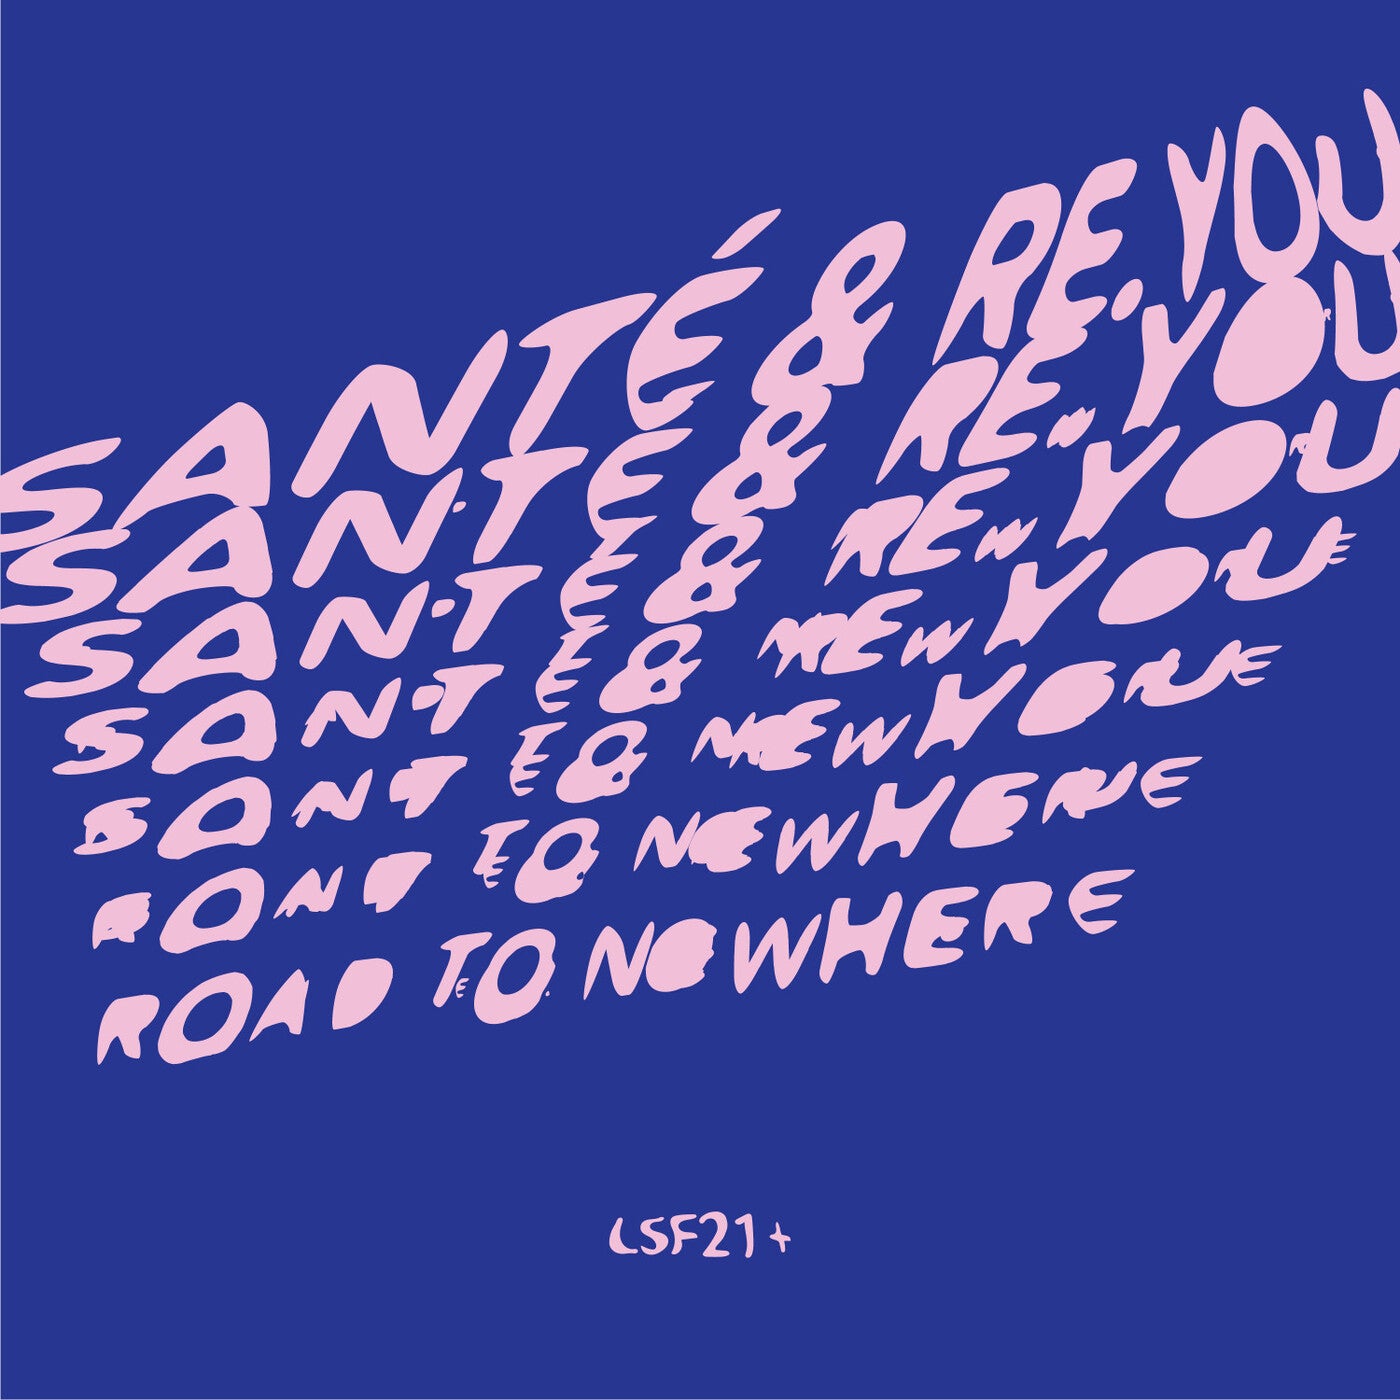 image cover: Sante, Re.you, Biishop, Oluhle - Road To Nowhere EP / LSF001